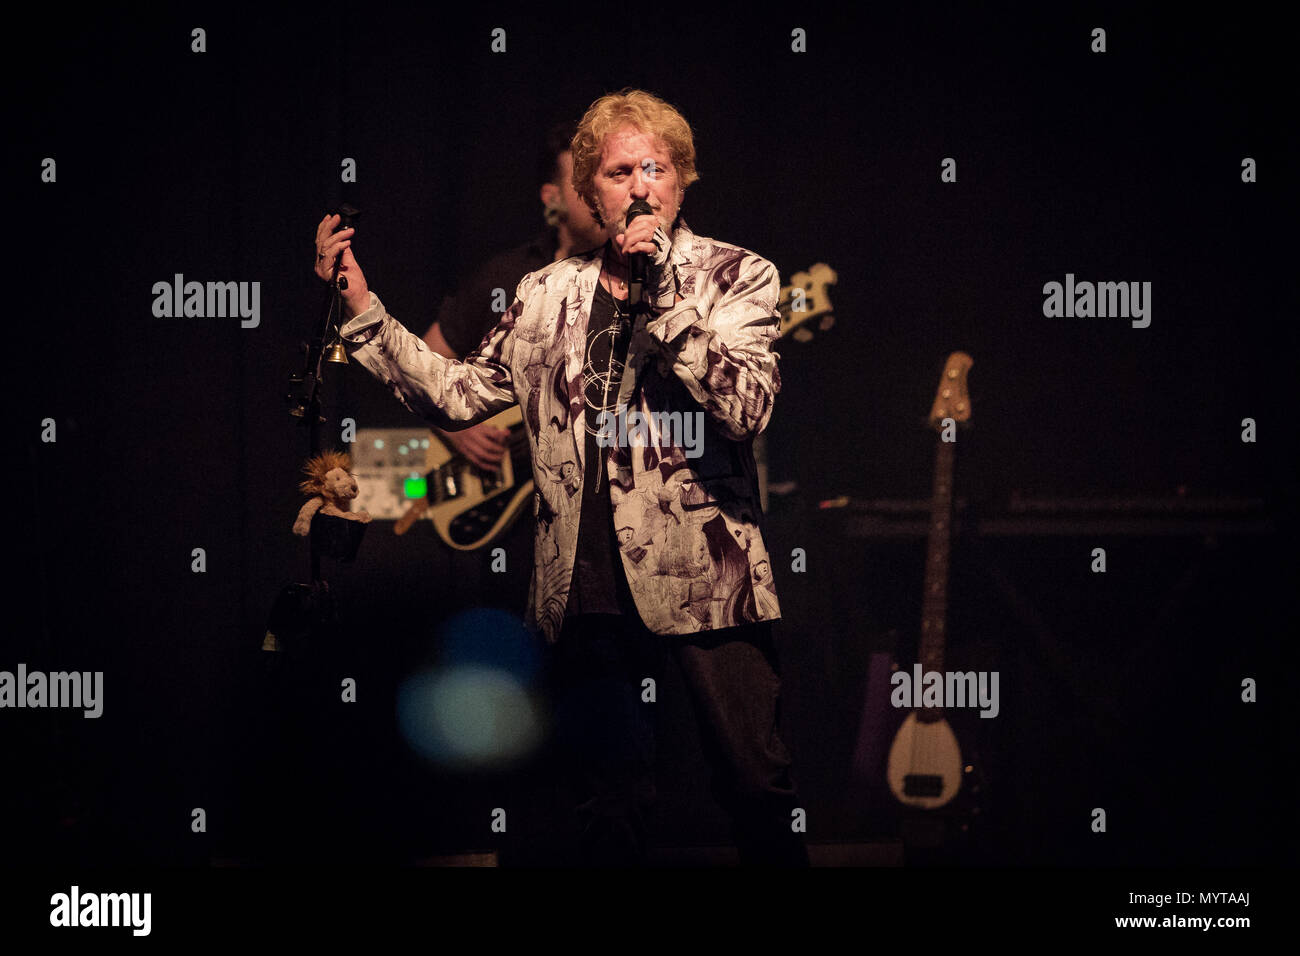 Norway, Oslo - June 7, 2018. Yes, the British progressive rock band, performs a live concert at Sentrum Scene in Oslo. Here vocalist and musician Jon Anderson is seen live on stage. (Photo credit: Gonzales Photo - Tord Litleskare). Credit: Gonzales Photo/Alamy Live News Stock Photo